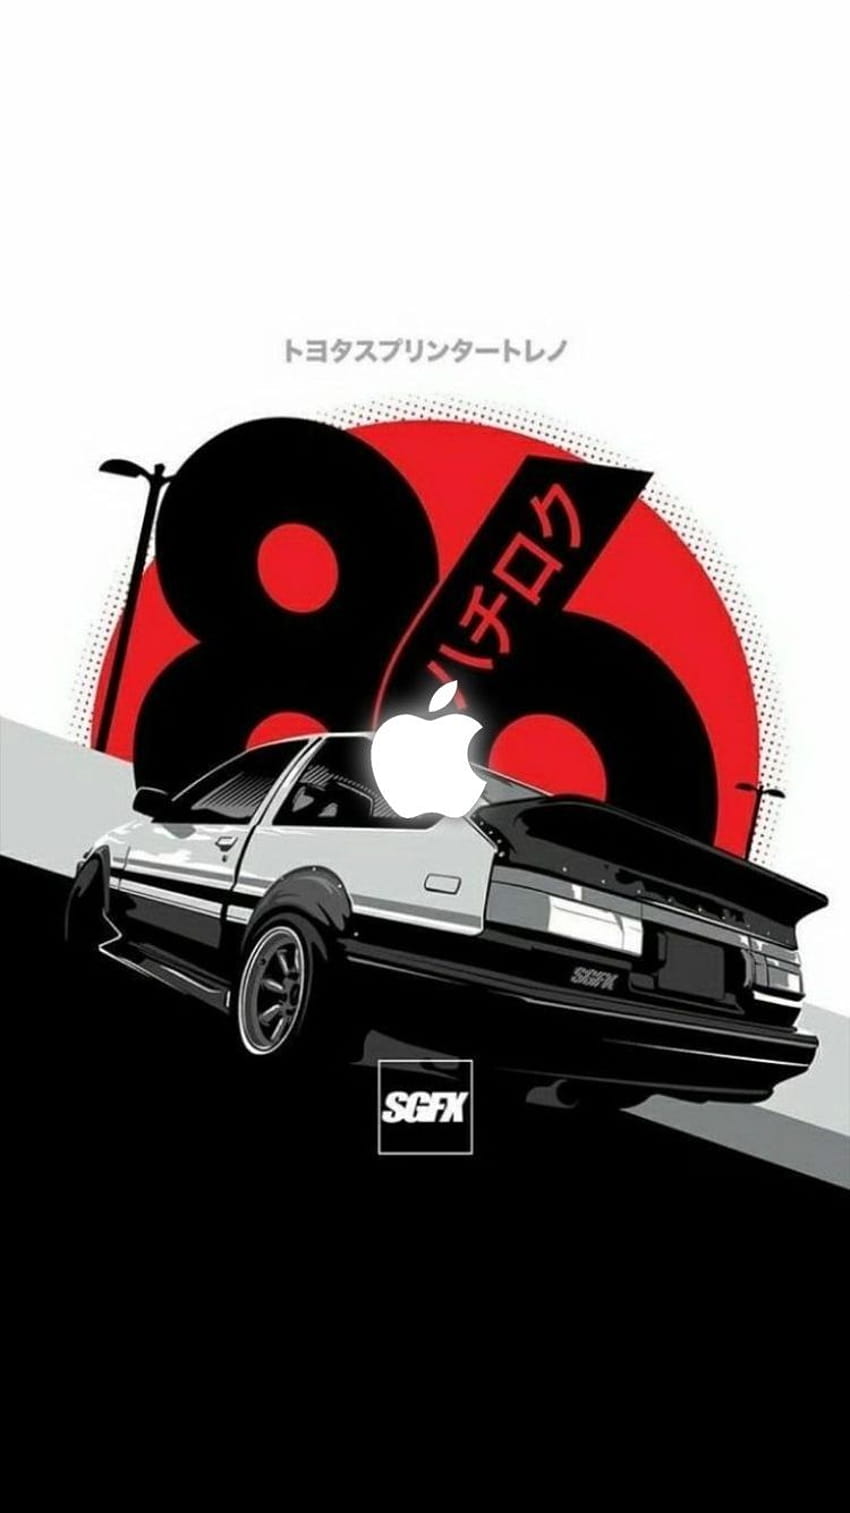 A black and white car on a black background with a red and white Apple logo - Toyota AE86